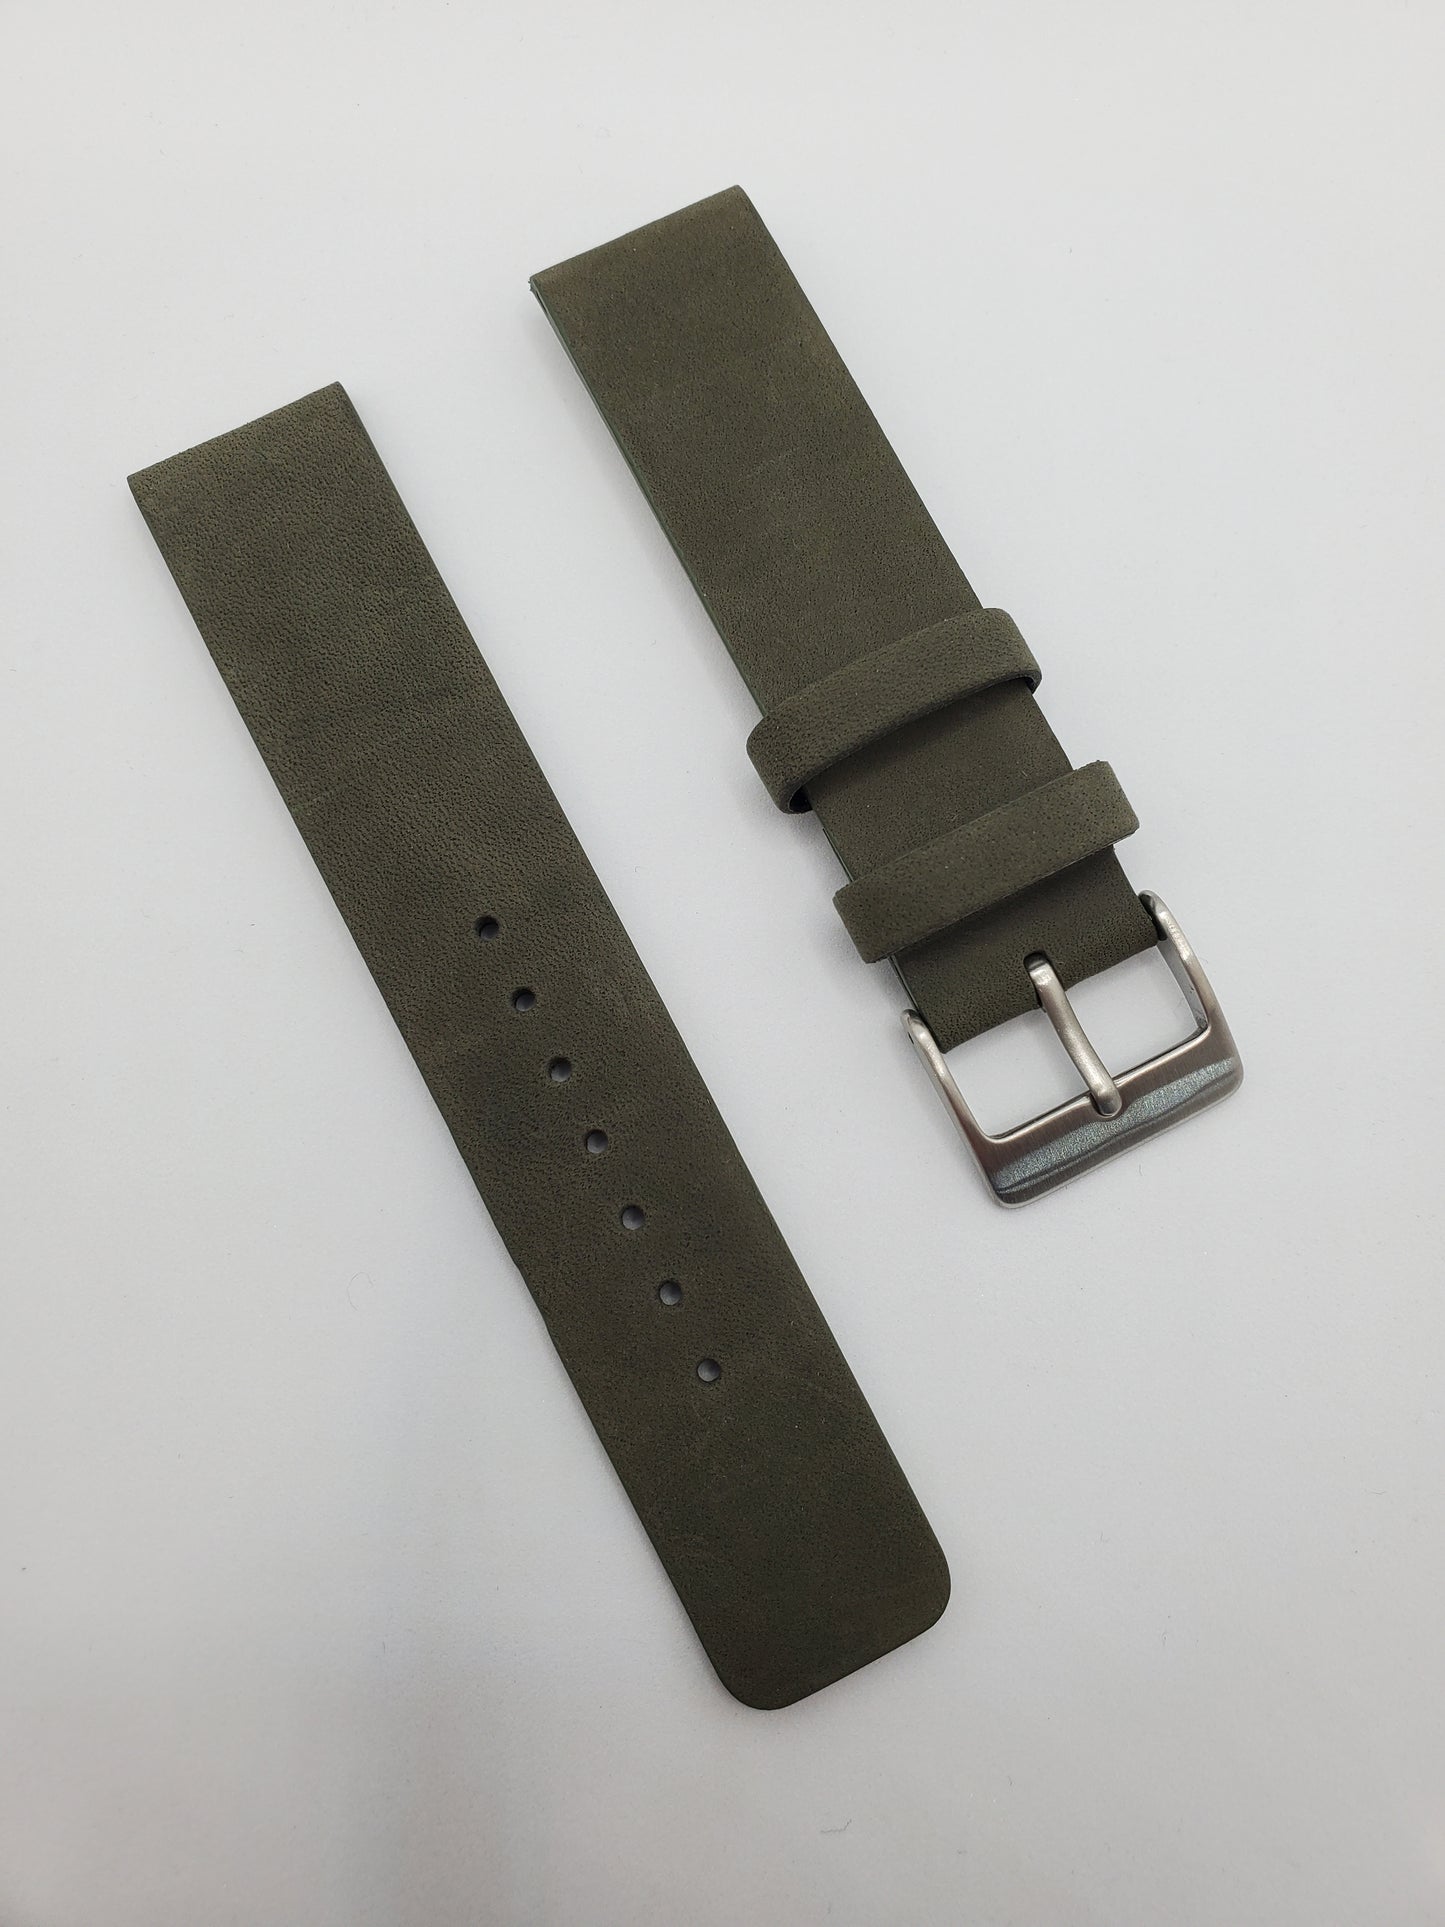 Suede Leather Strap with Steel Buckle (avail. Mustard, Green, Brown, Beige)